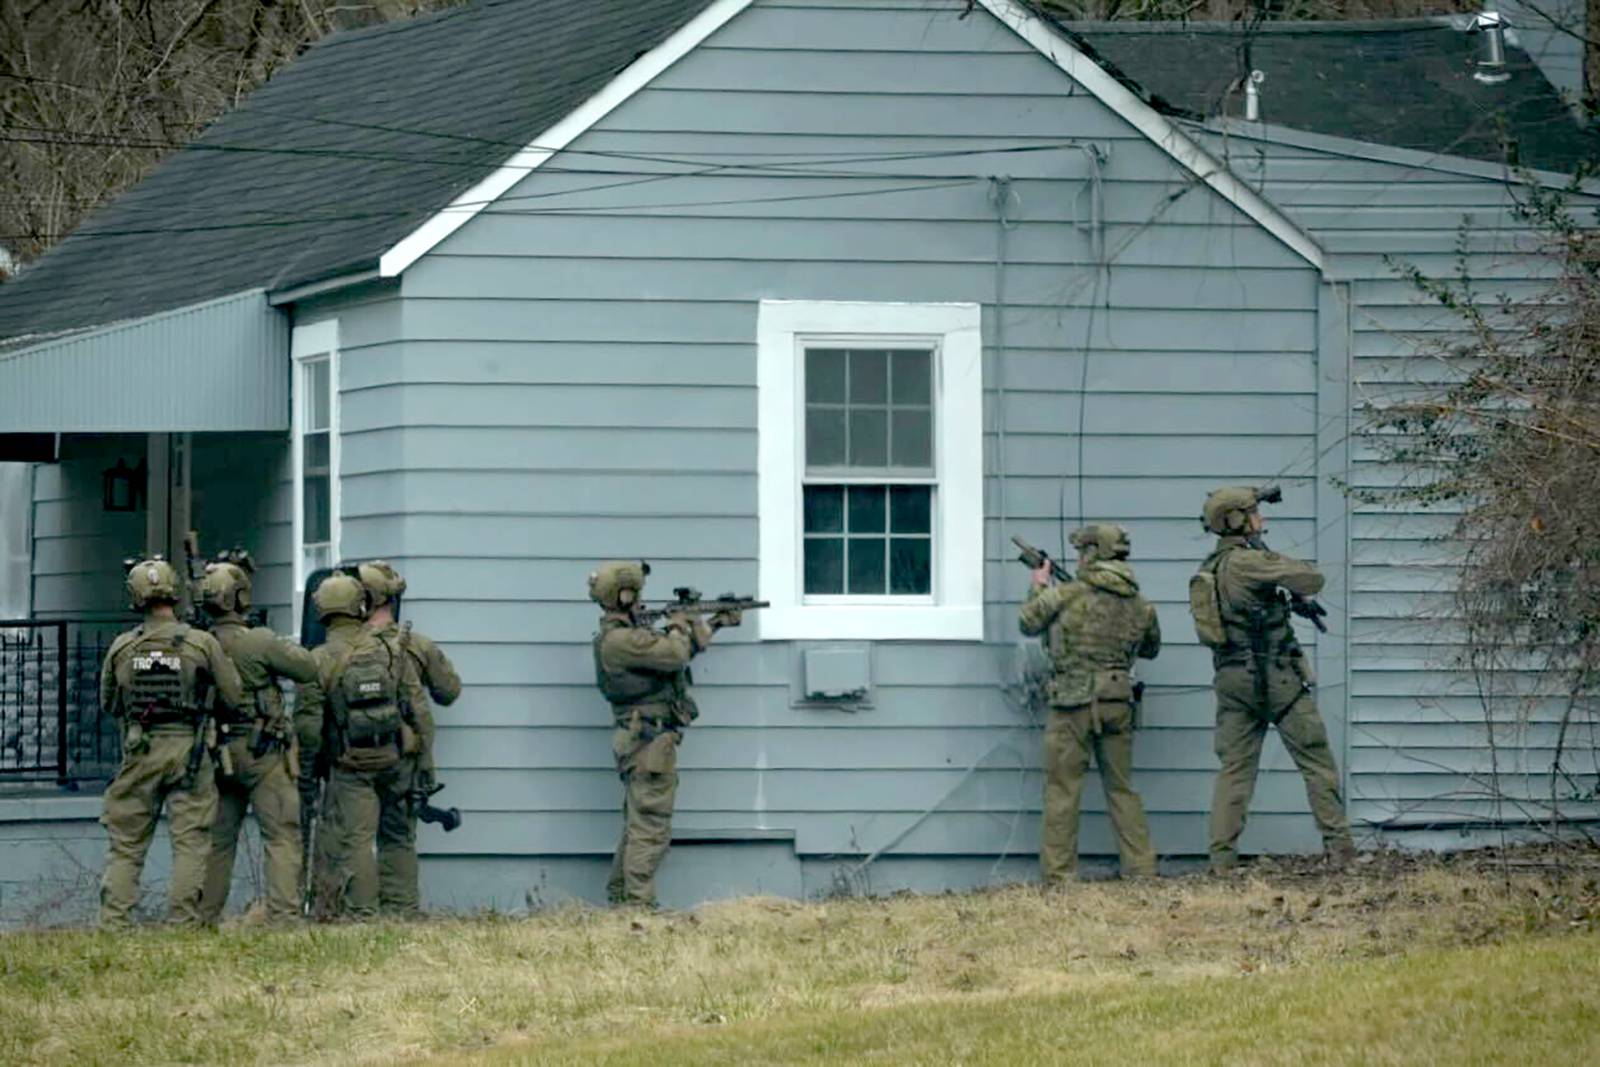 A SWAT team investigates a house on Warren Rd near Loch Raven Reservoir during a manhunt for 24-year-old Cockeysville resident David Emory Linthicum.